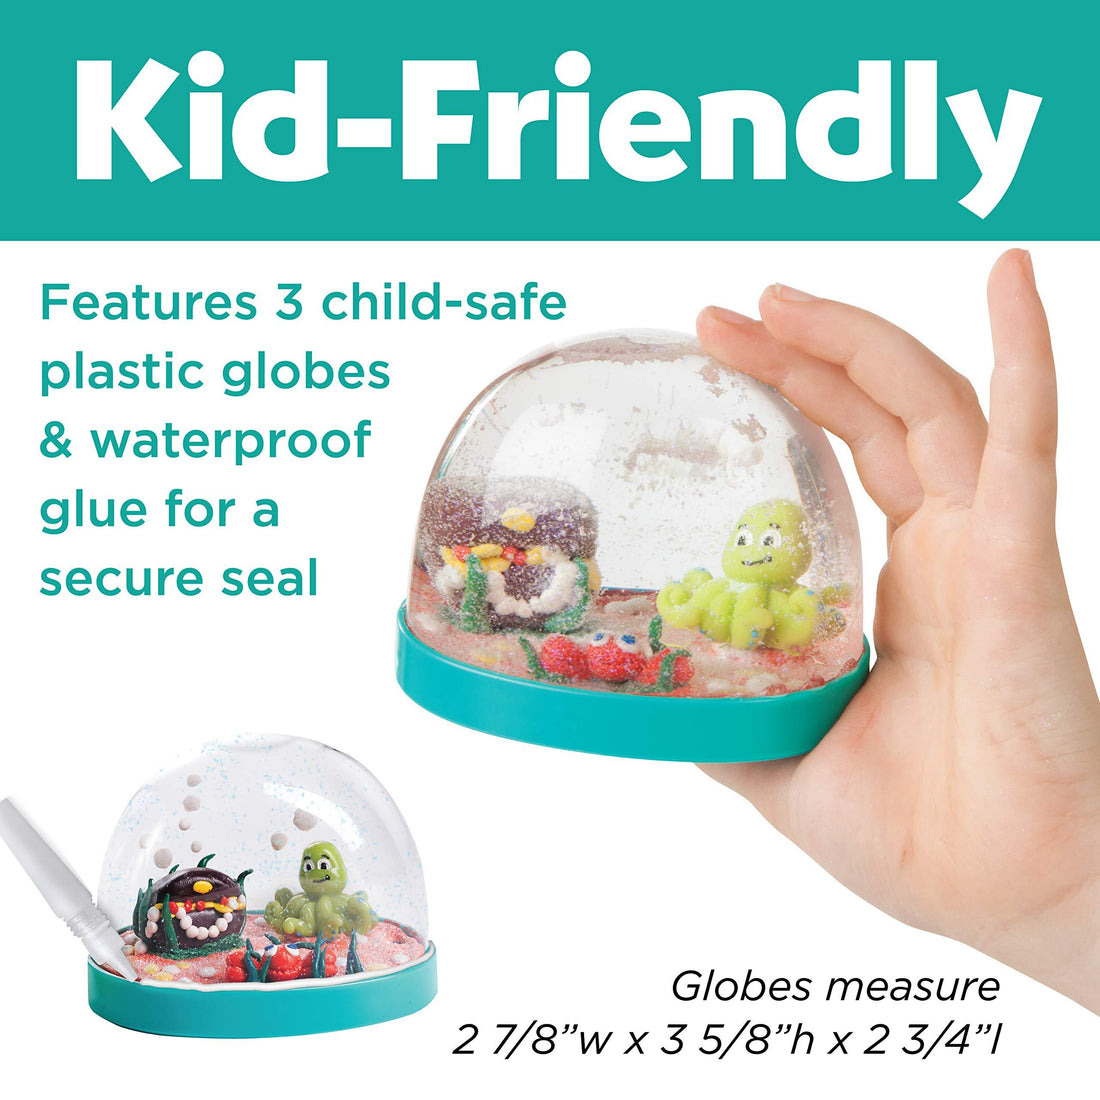 Make Your Own Water Globes - Under the Sea Snow Globes - Kitty Hawk Kites Online Store